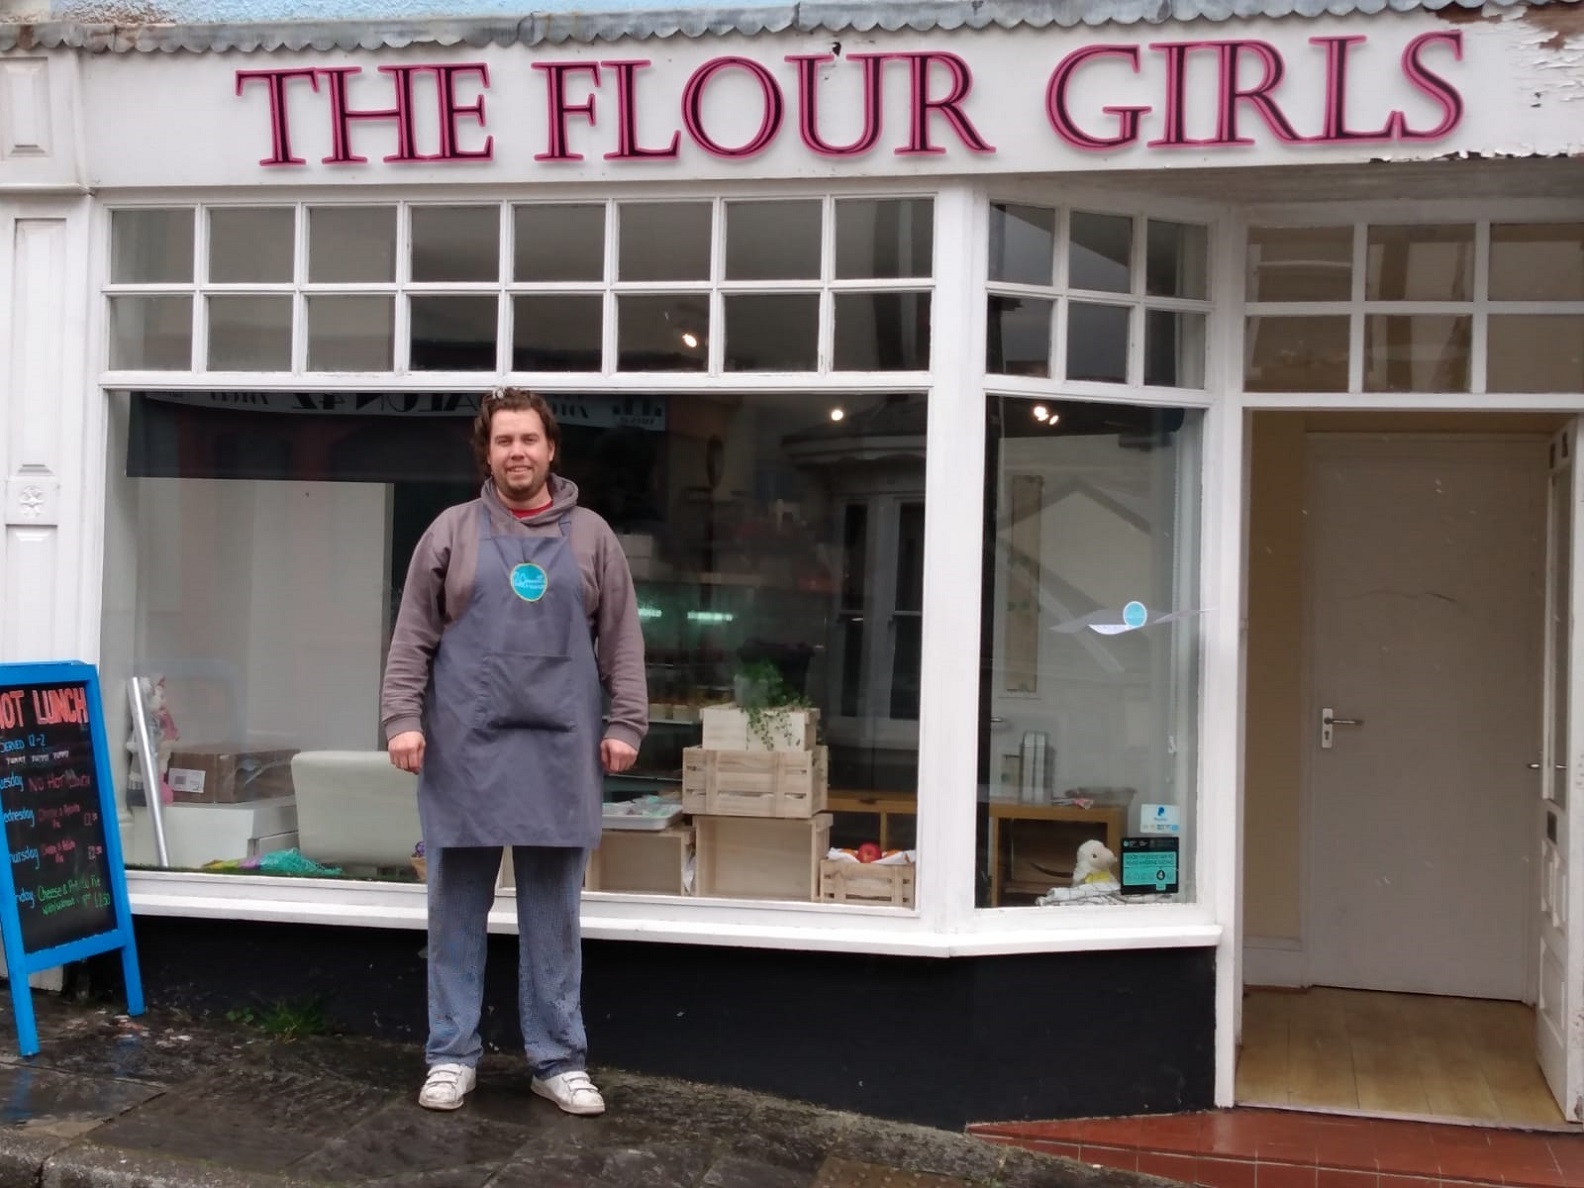 Chris O’Connell, who along with his wife Rhian, owns The Flour Girls in Blaenavon.